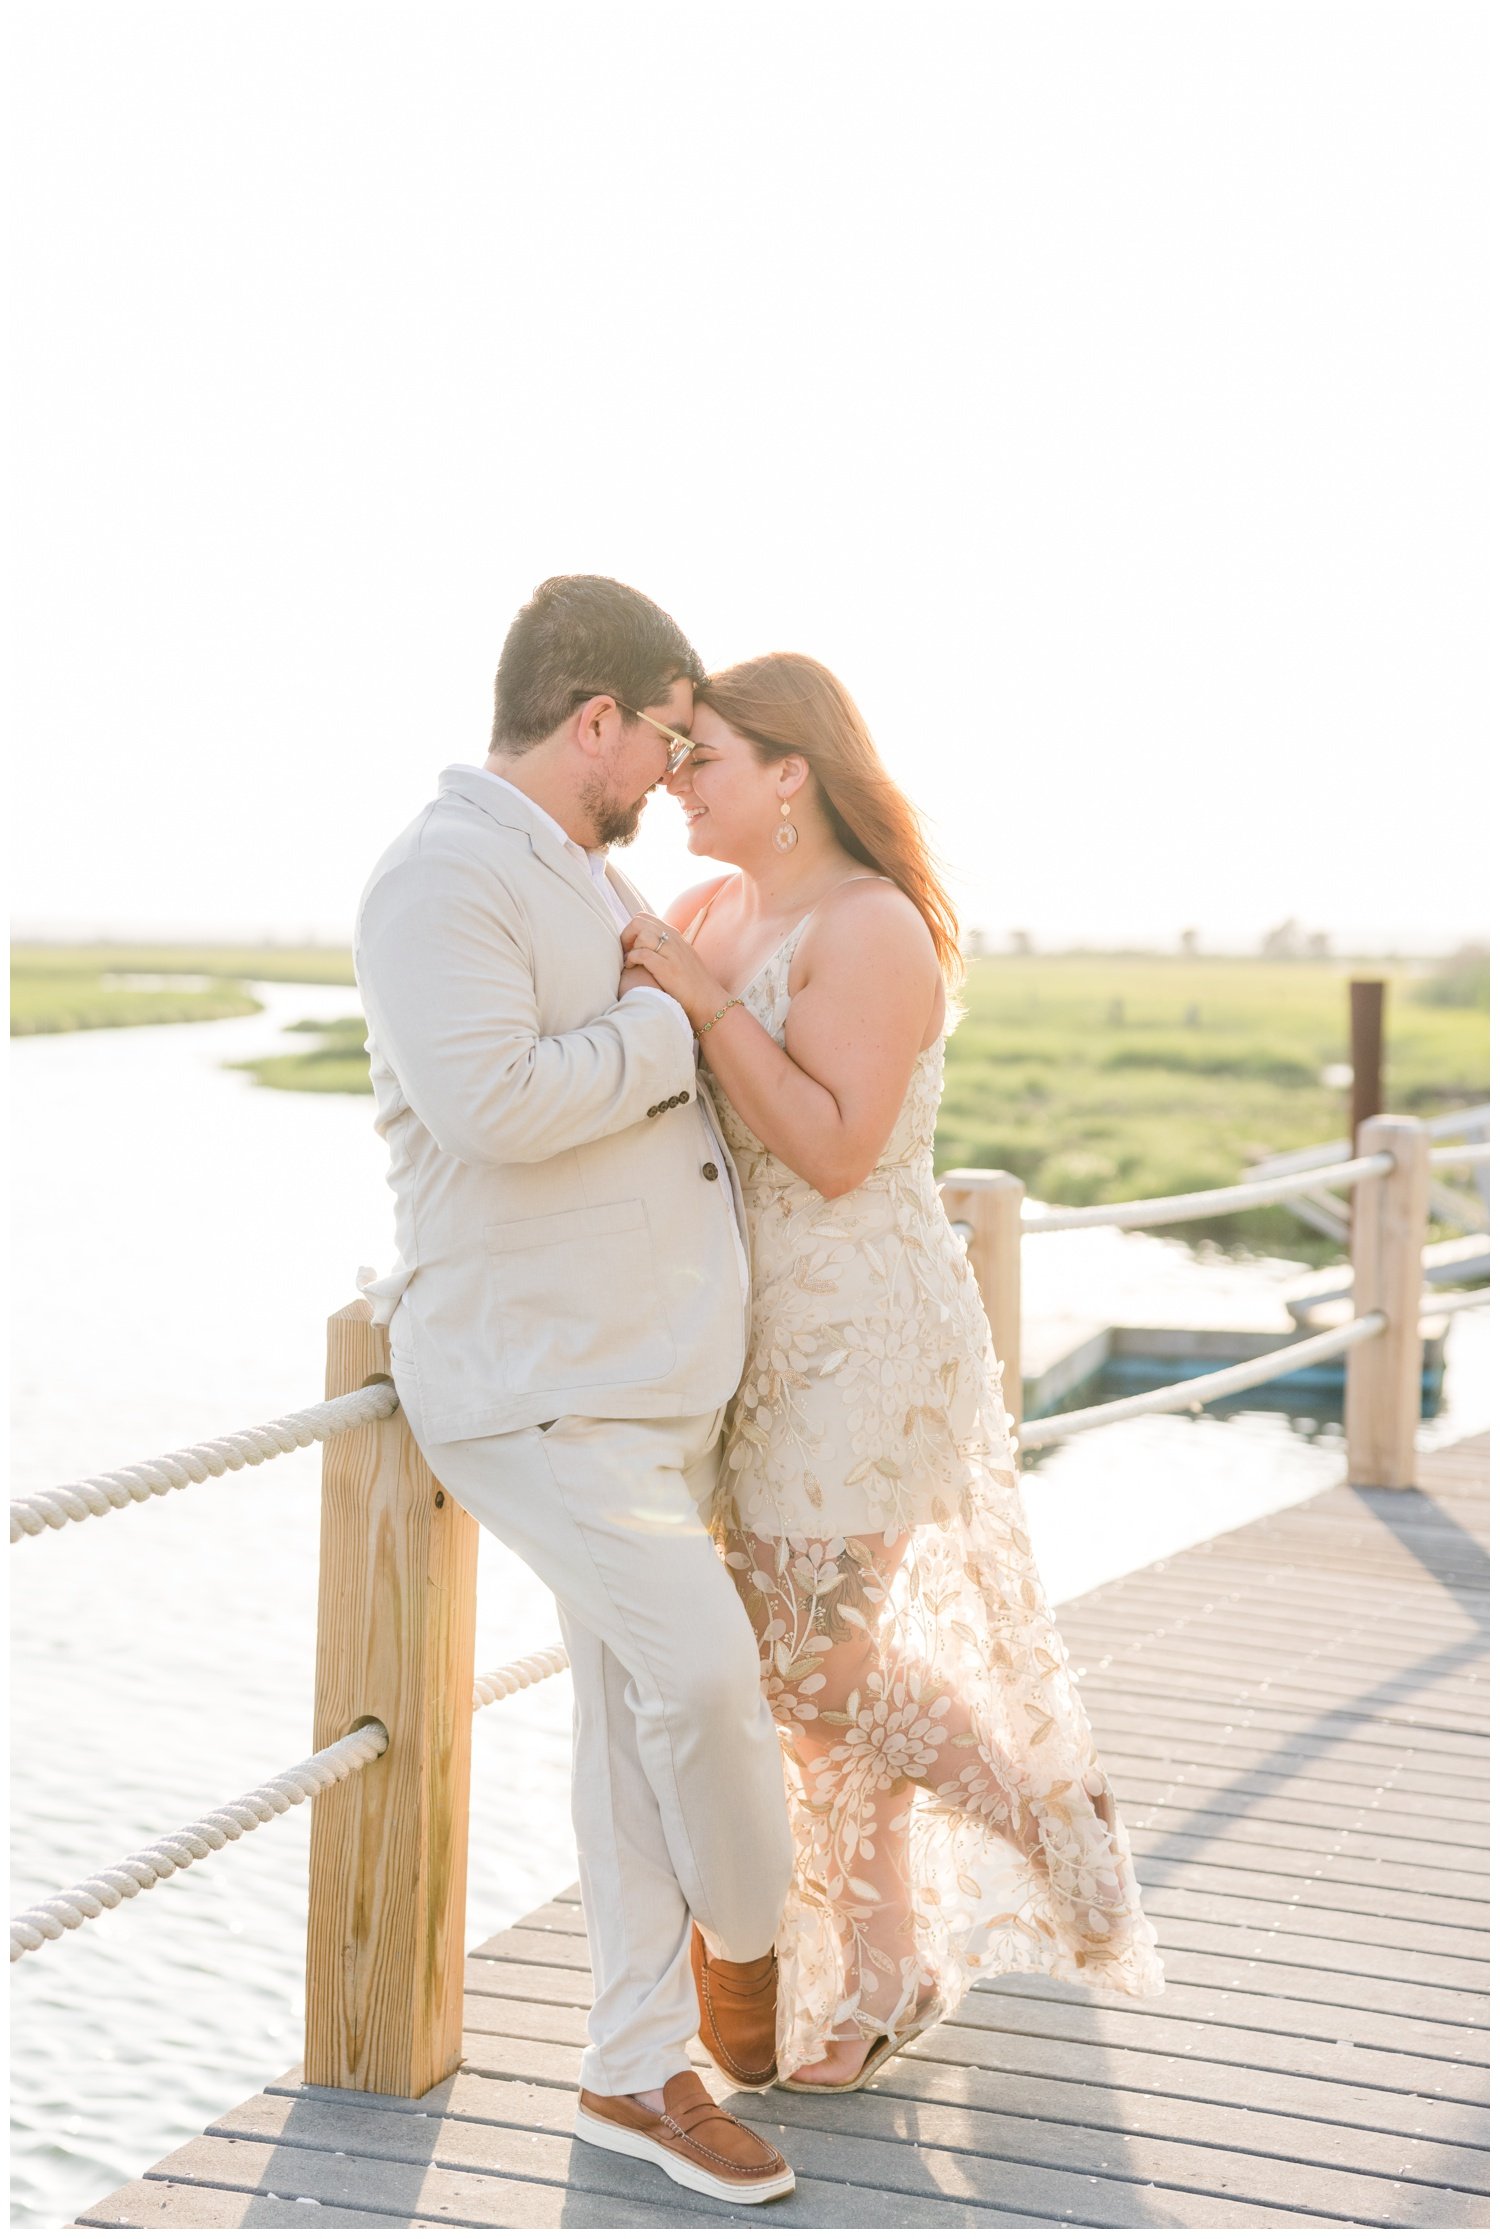 Stone-Harbor-summer-engagement-session-on-the-beach-jersey-shore-10.jpg